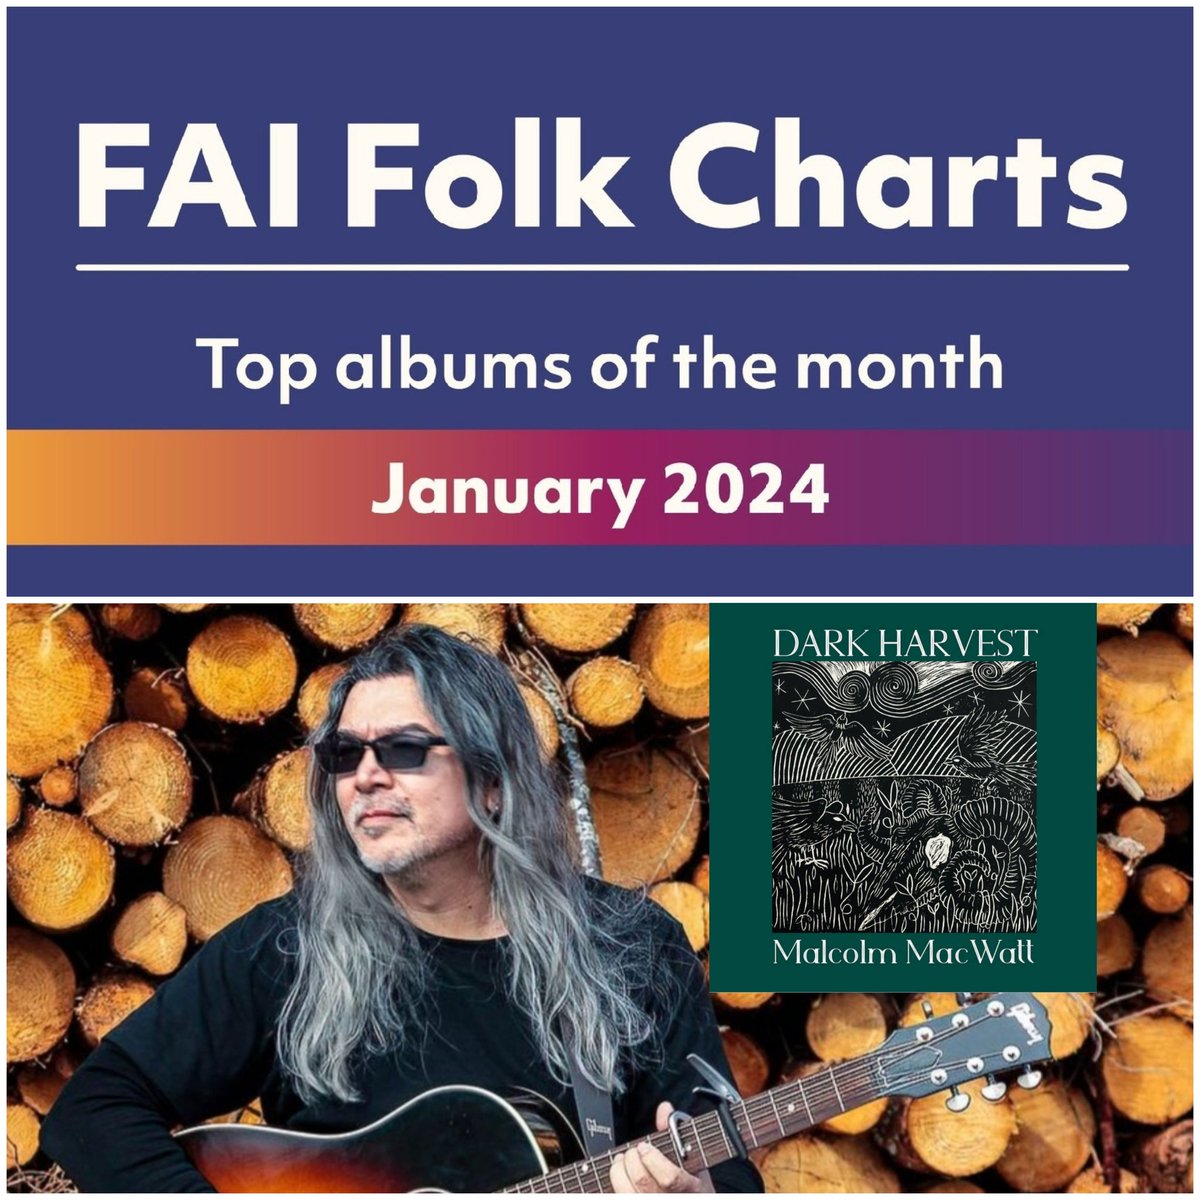 So pleased to make it into the #Top10 @folkalliance 🇺🇸🏴󠁧󠁢󠁳󠁣󠁴󠁿 Many thanks to all the #radio hosts, listeners and reviewers 🙏🏻 #folkmusic #americana #singersongwriter #music #folkchart #newmusic #roots #folksinger #charts #folkradio #newmusic #newalbum #original #dark